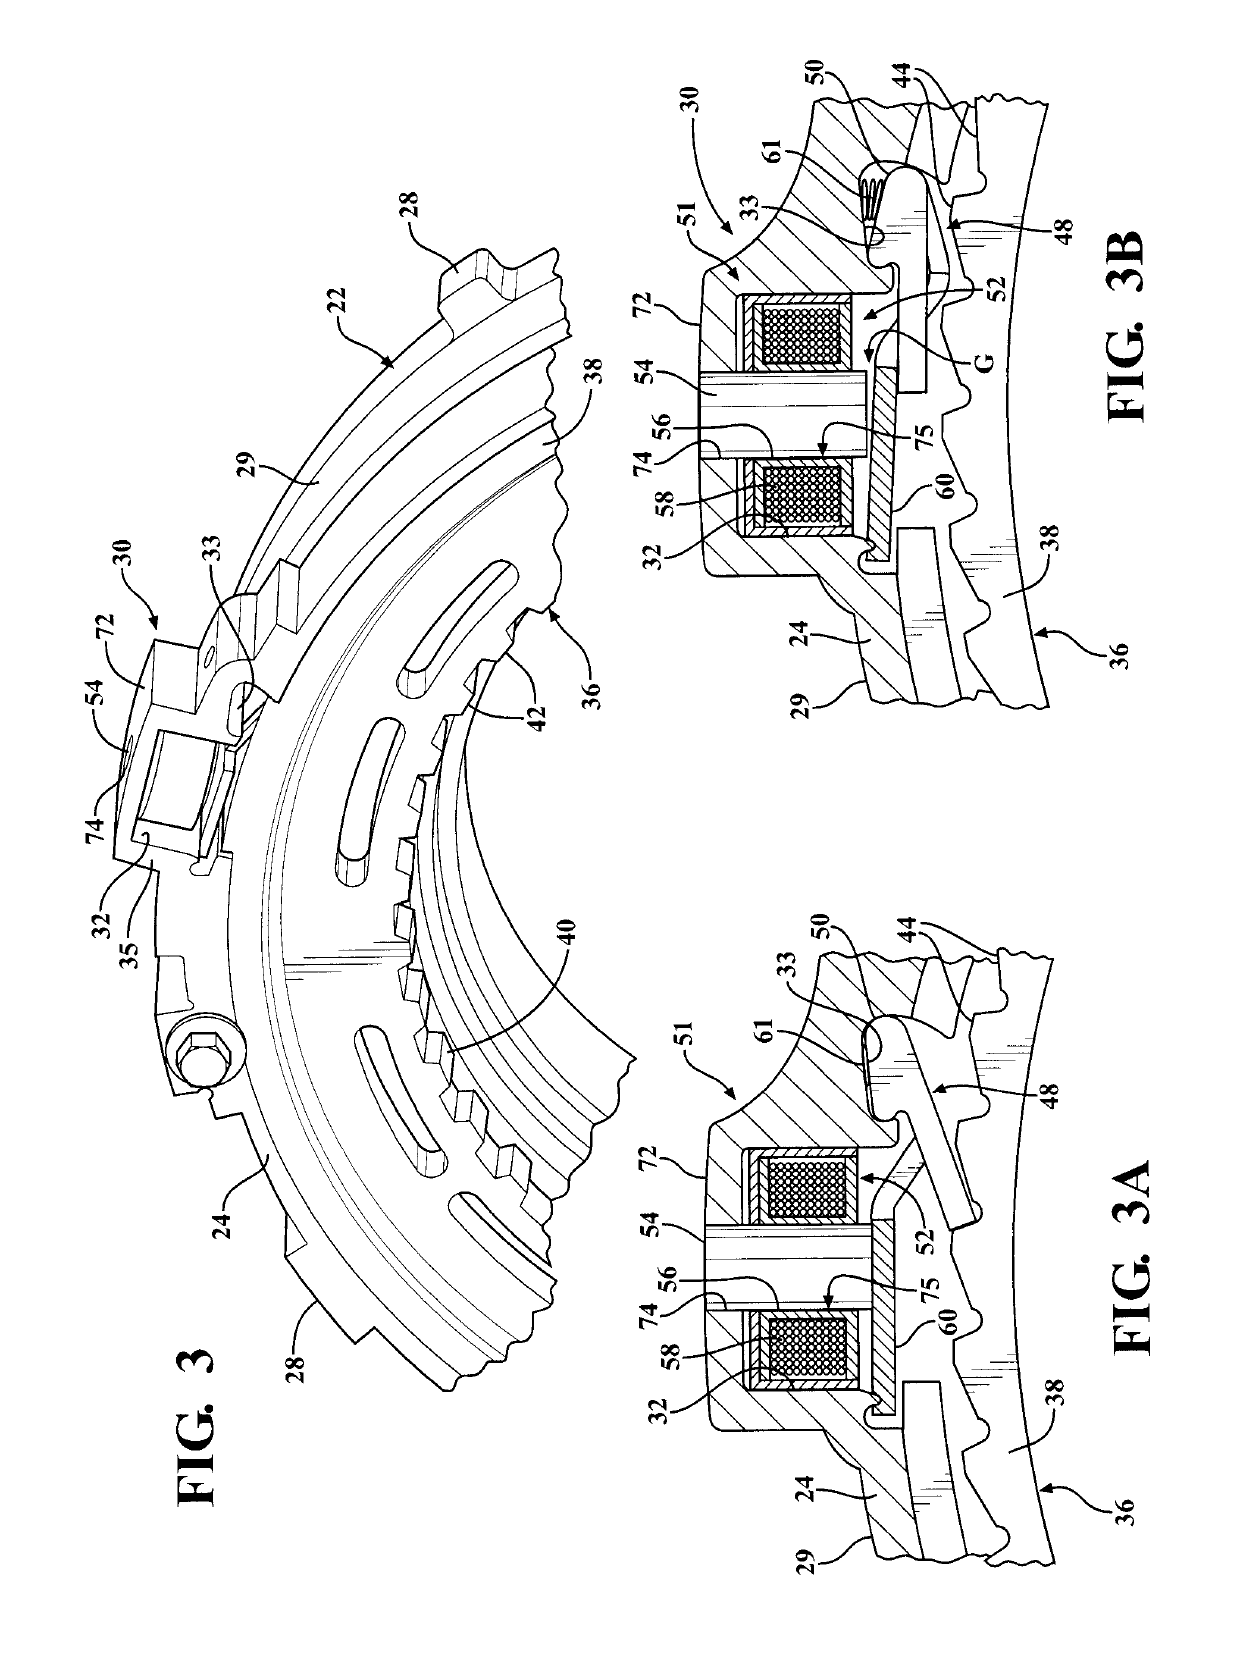 Dual-acting electric one-way clutch assembly